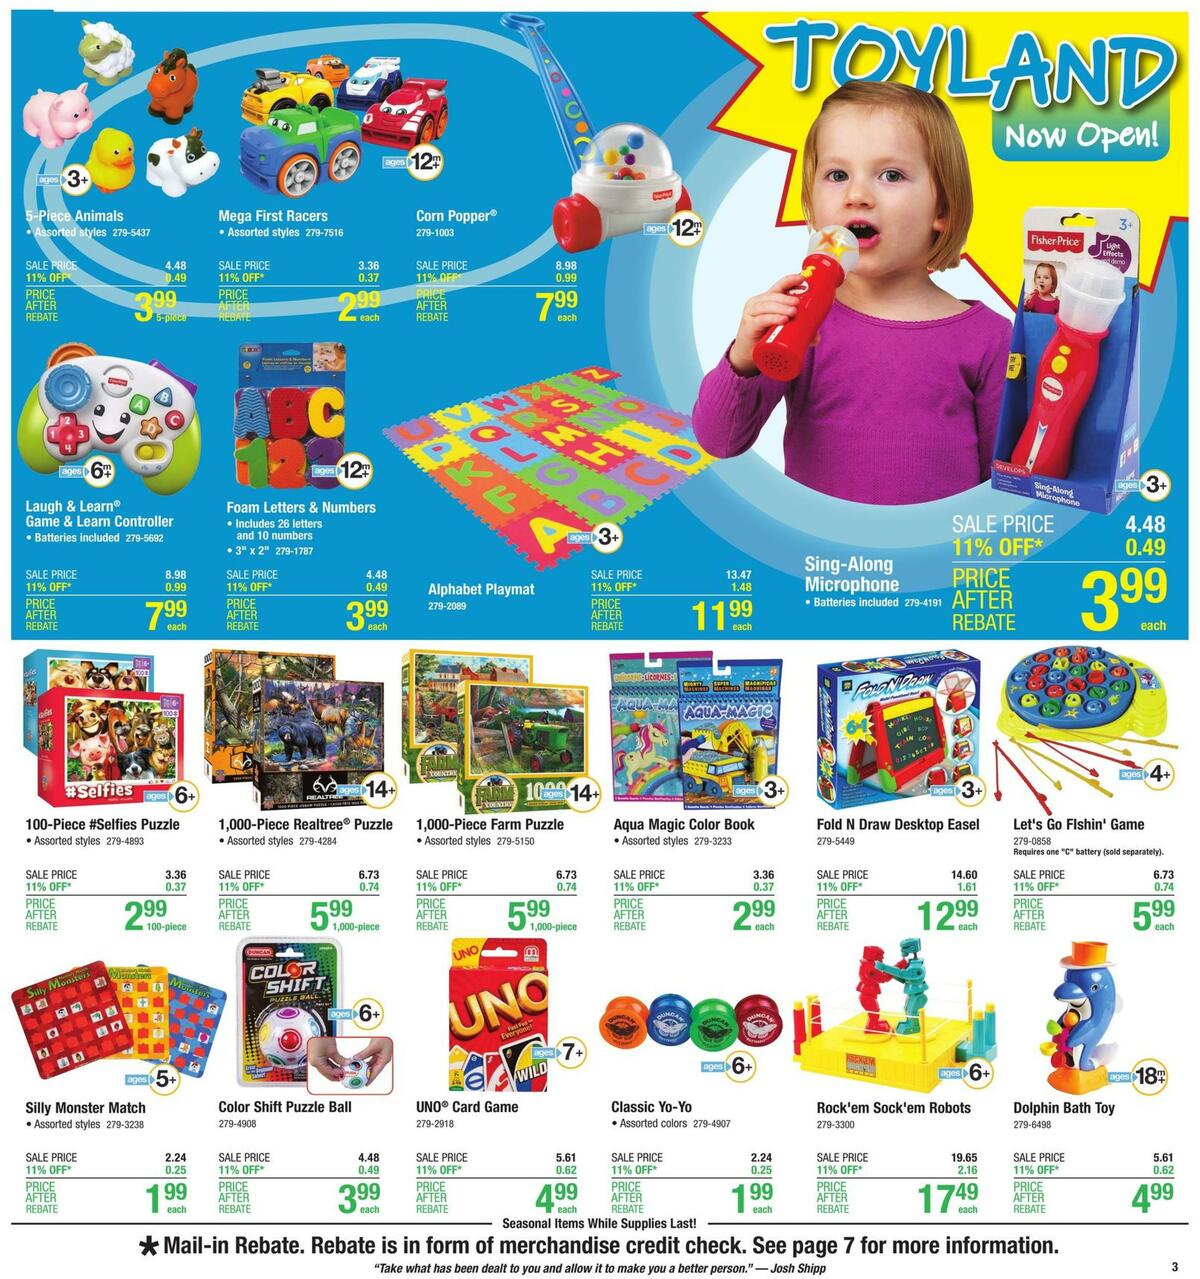 Menards Weekly Ad from October 4